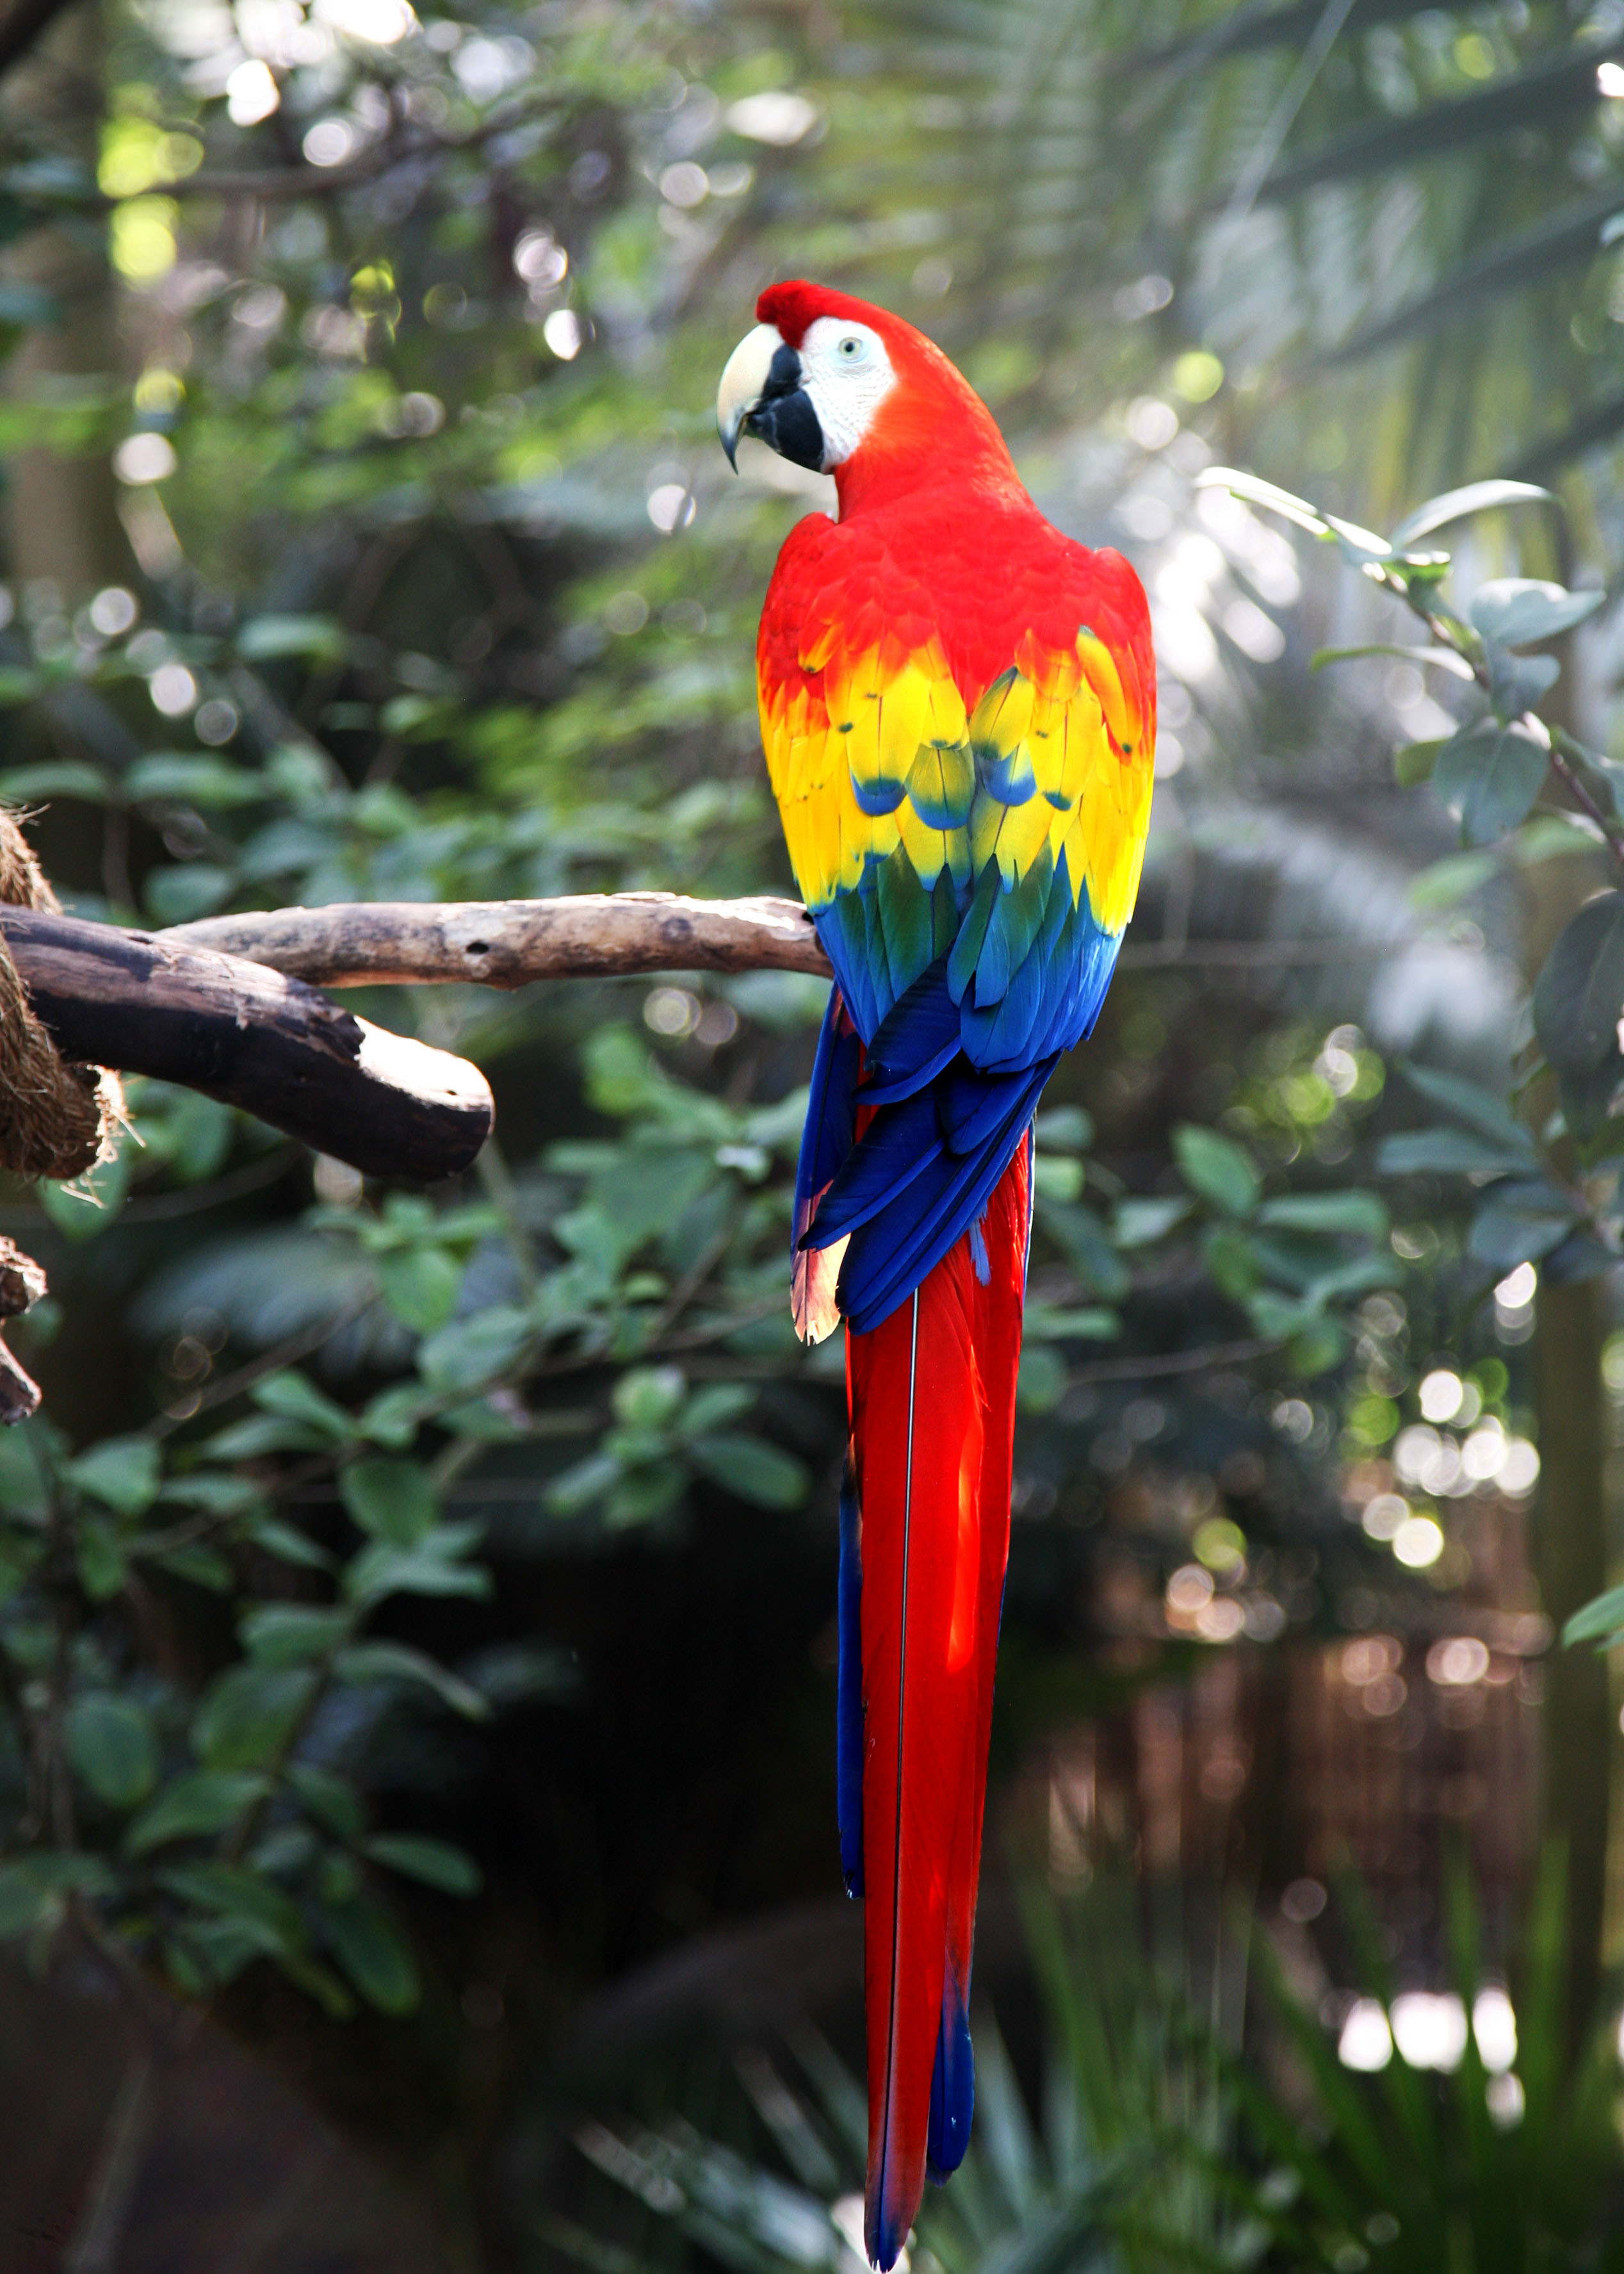 A Kid's Photo | Photo of an Scarlet MaCaw Parrot